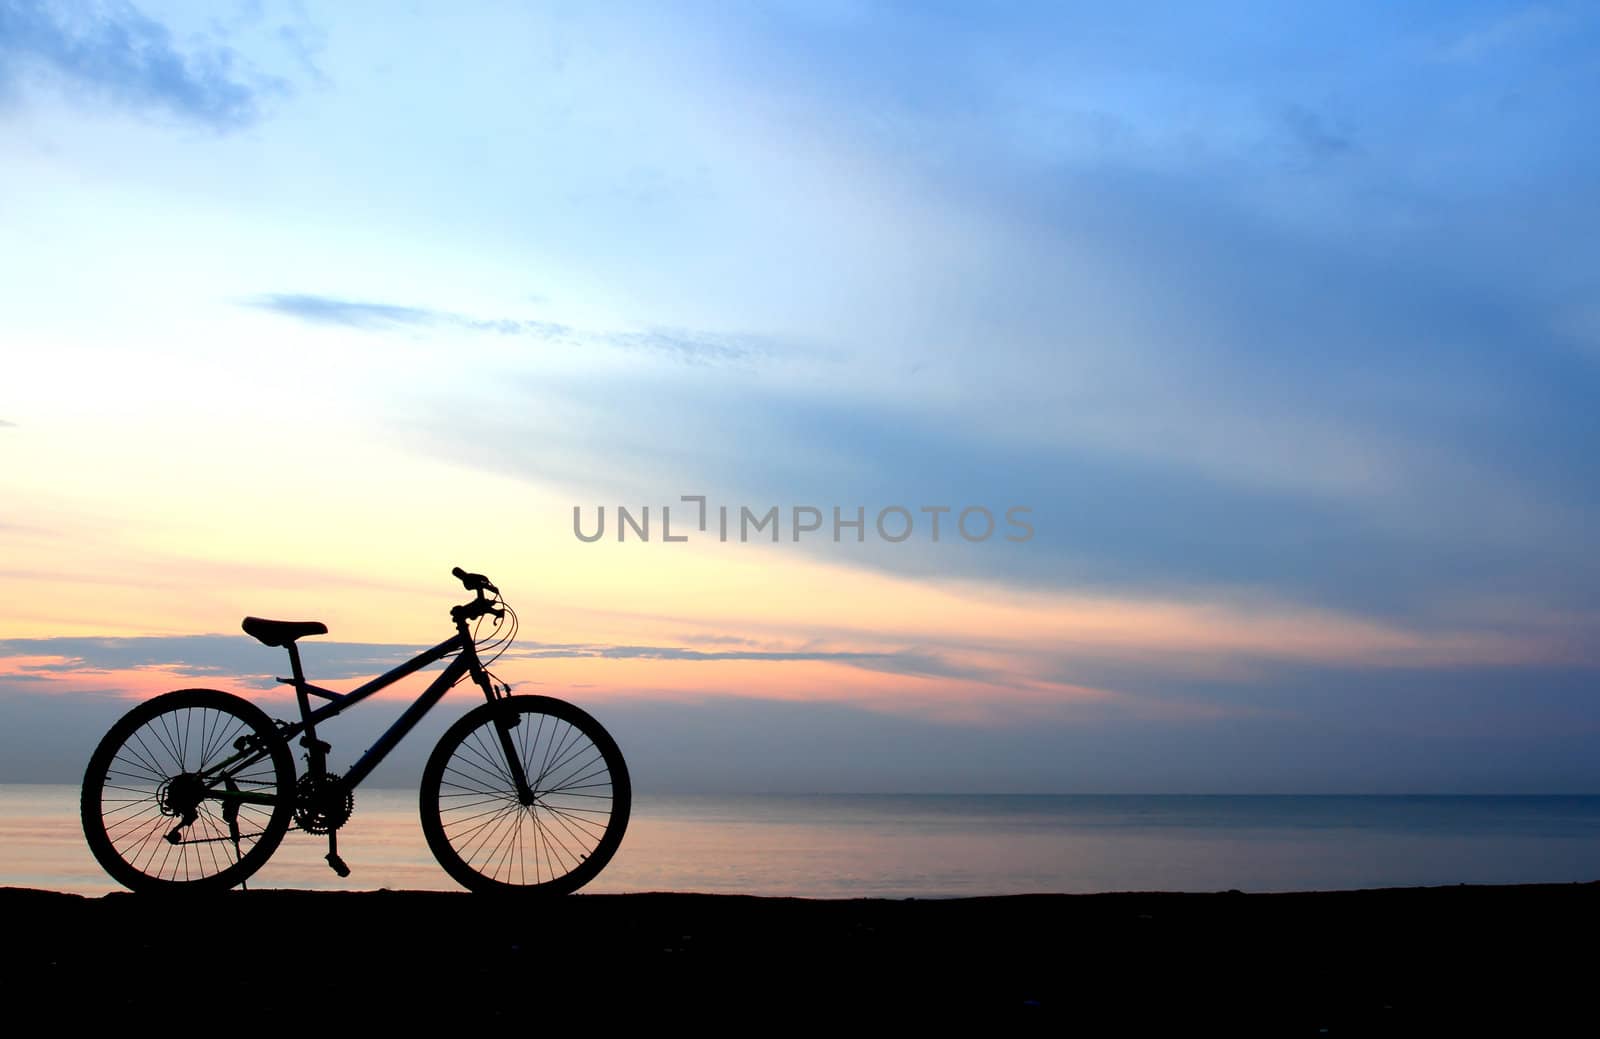 Silhouette of a Bike on the Beach